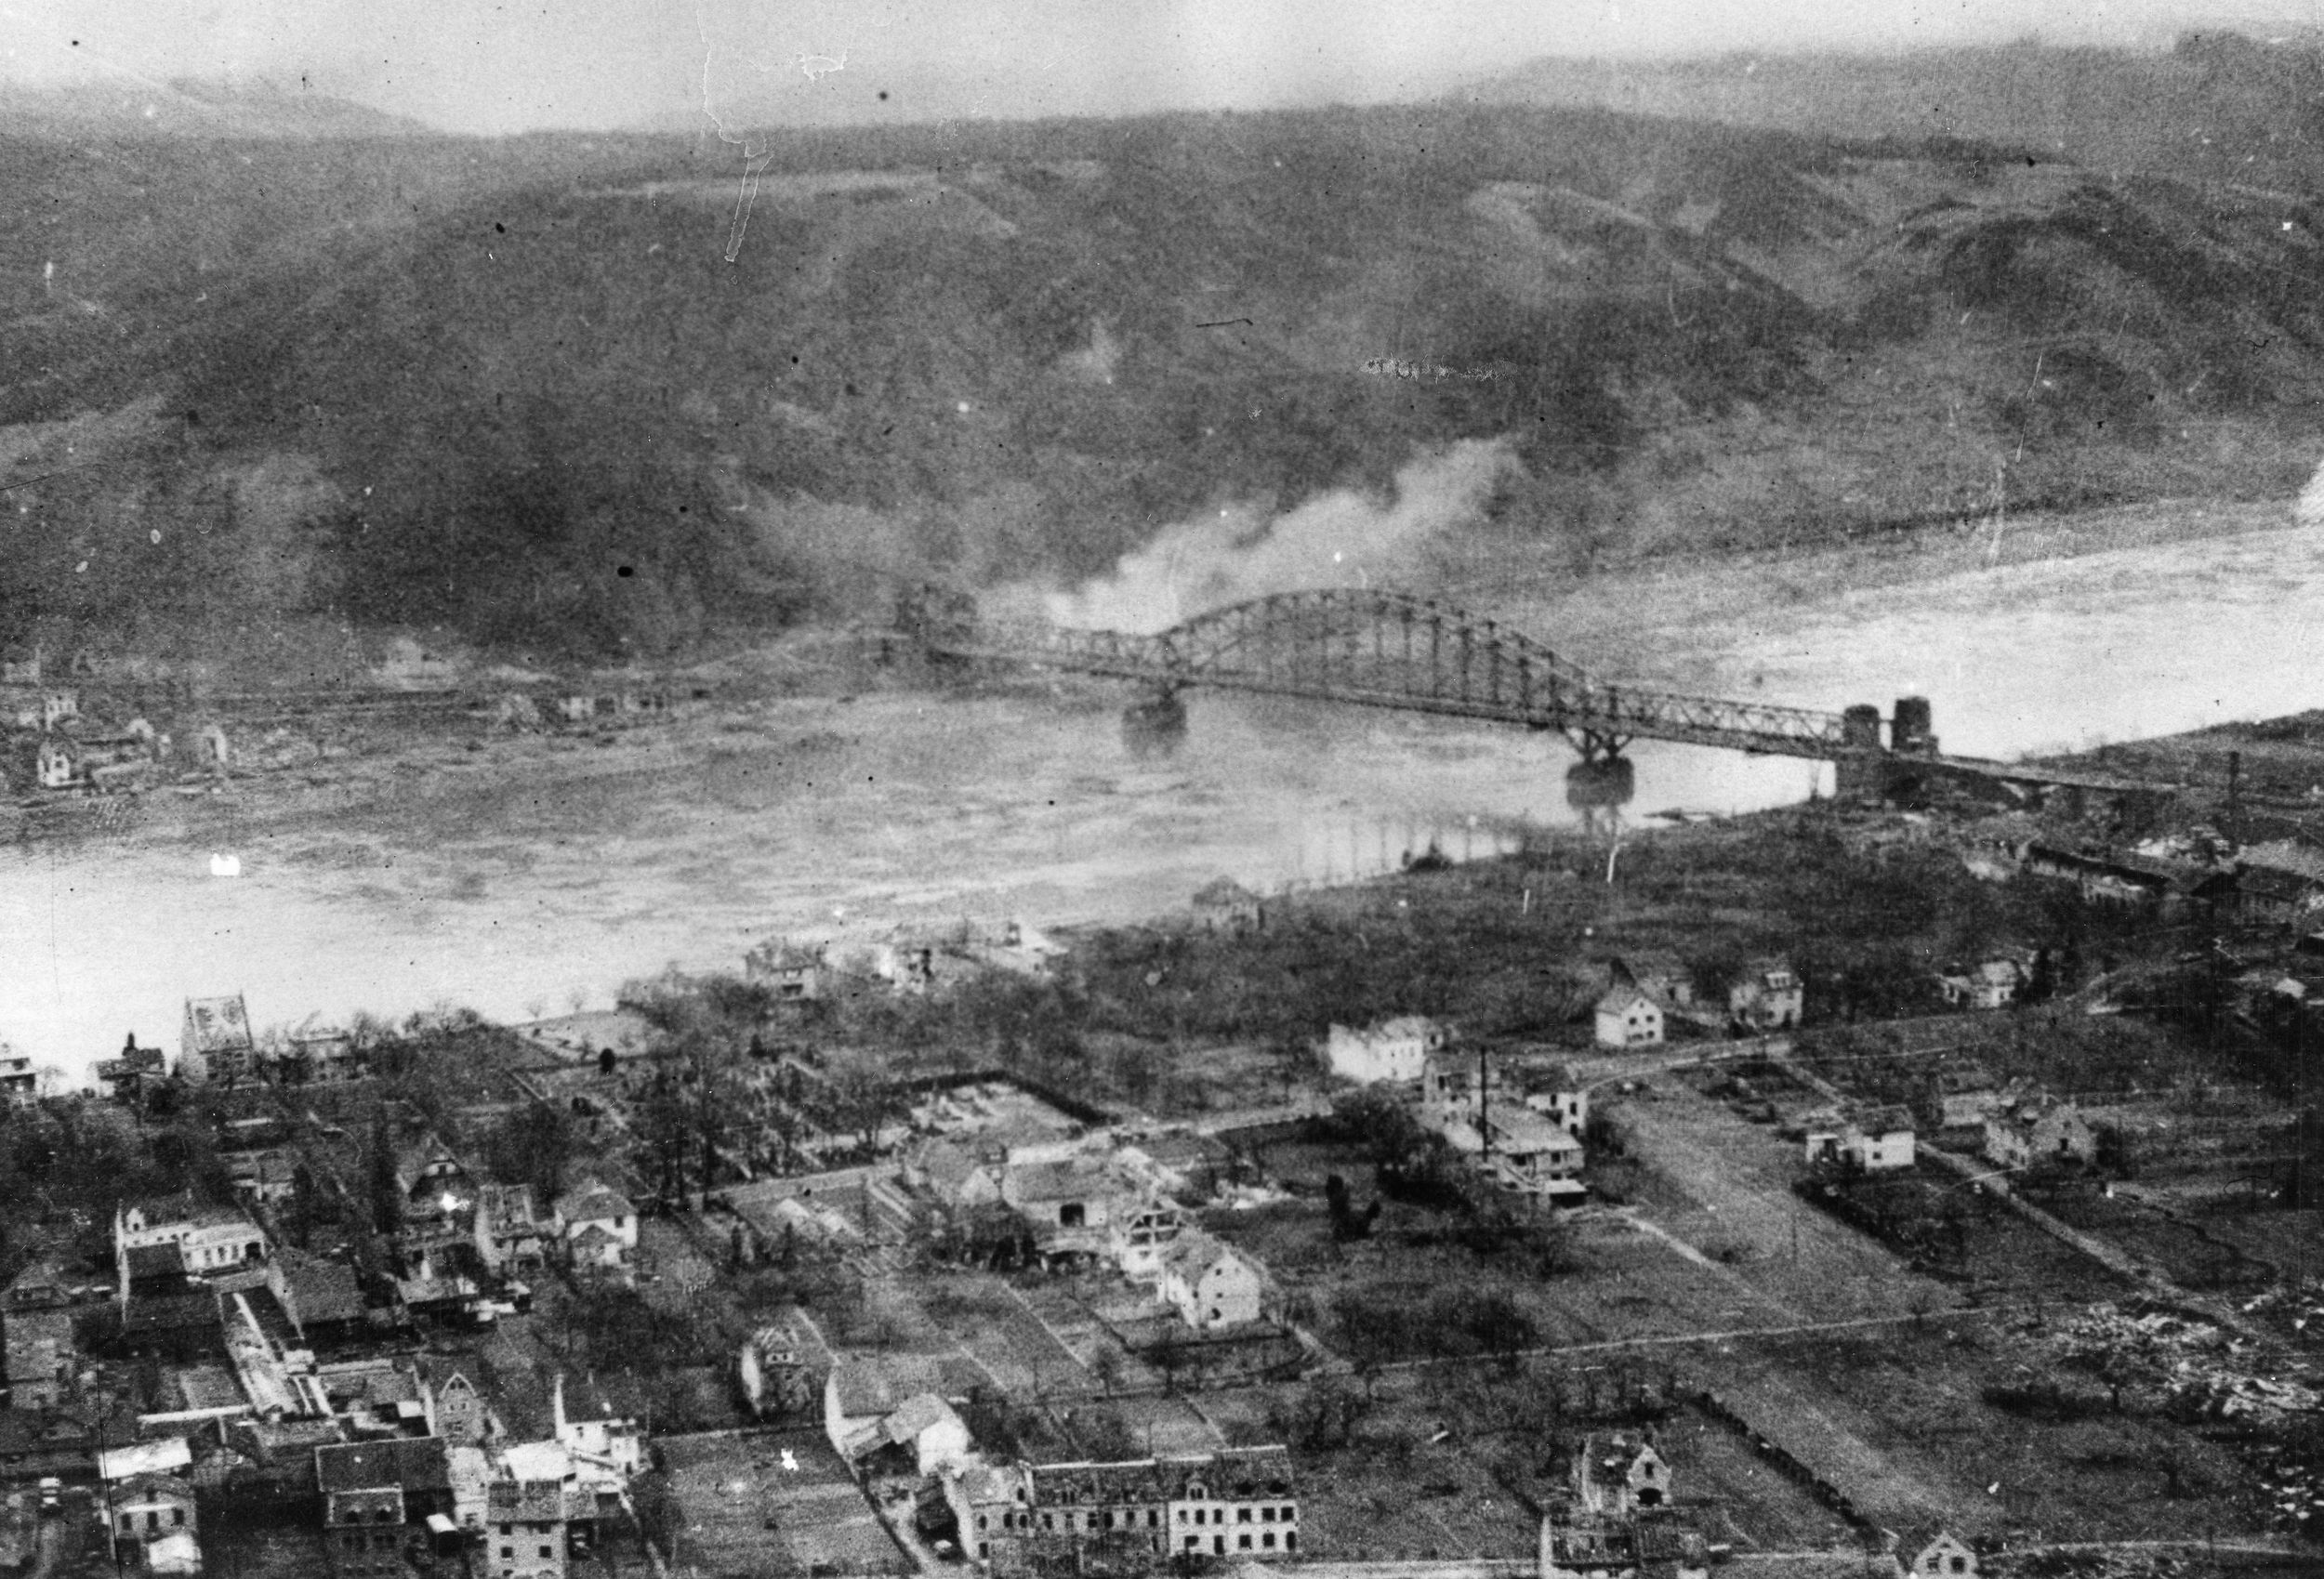 Cohn crossed the Rhine River on the Ludendorff bridge, the only bridge over the Rhine captured by the Allies. The bridge collapsed into the river 10 days after it was captured.